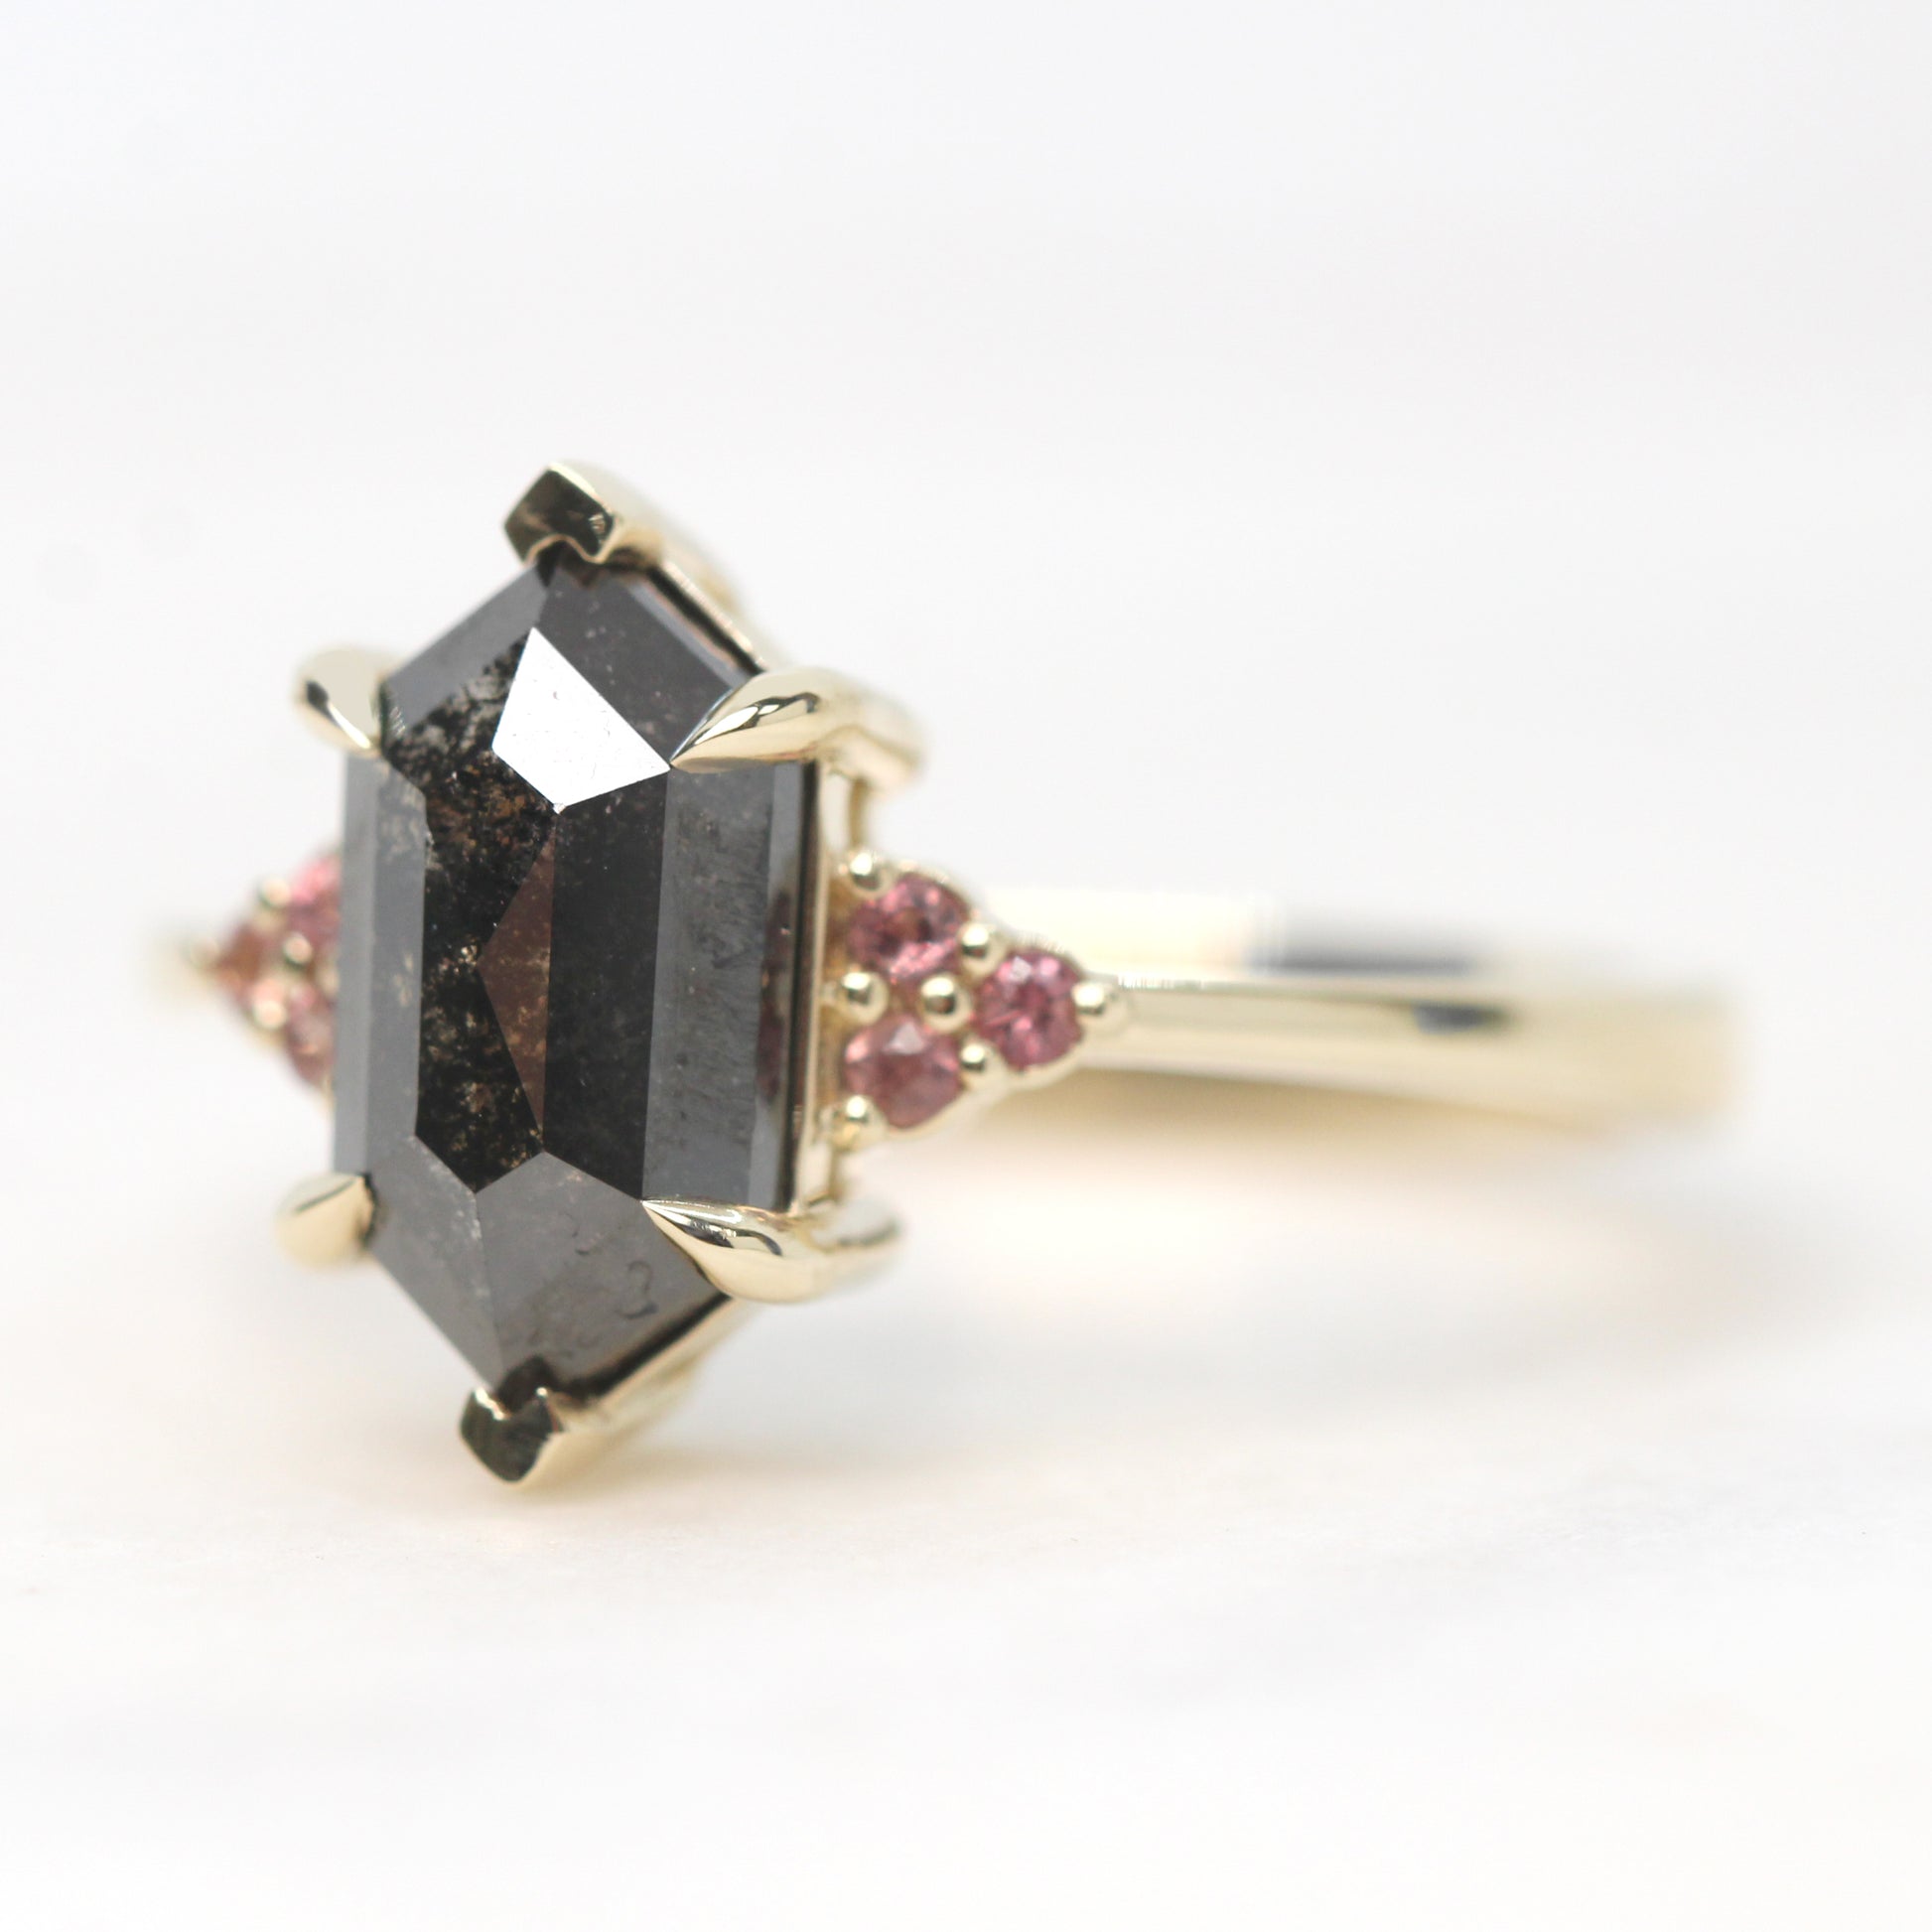 Imogene Ring with a 2.21 Carat Black Hexagon Celestial Diamond and Berry Sapphire Accents in 14k Yellow Gold - Ready to Size and Ship - Midwinter Co. Alternative Bridal Rings and Modern Fine Jewelry